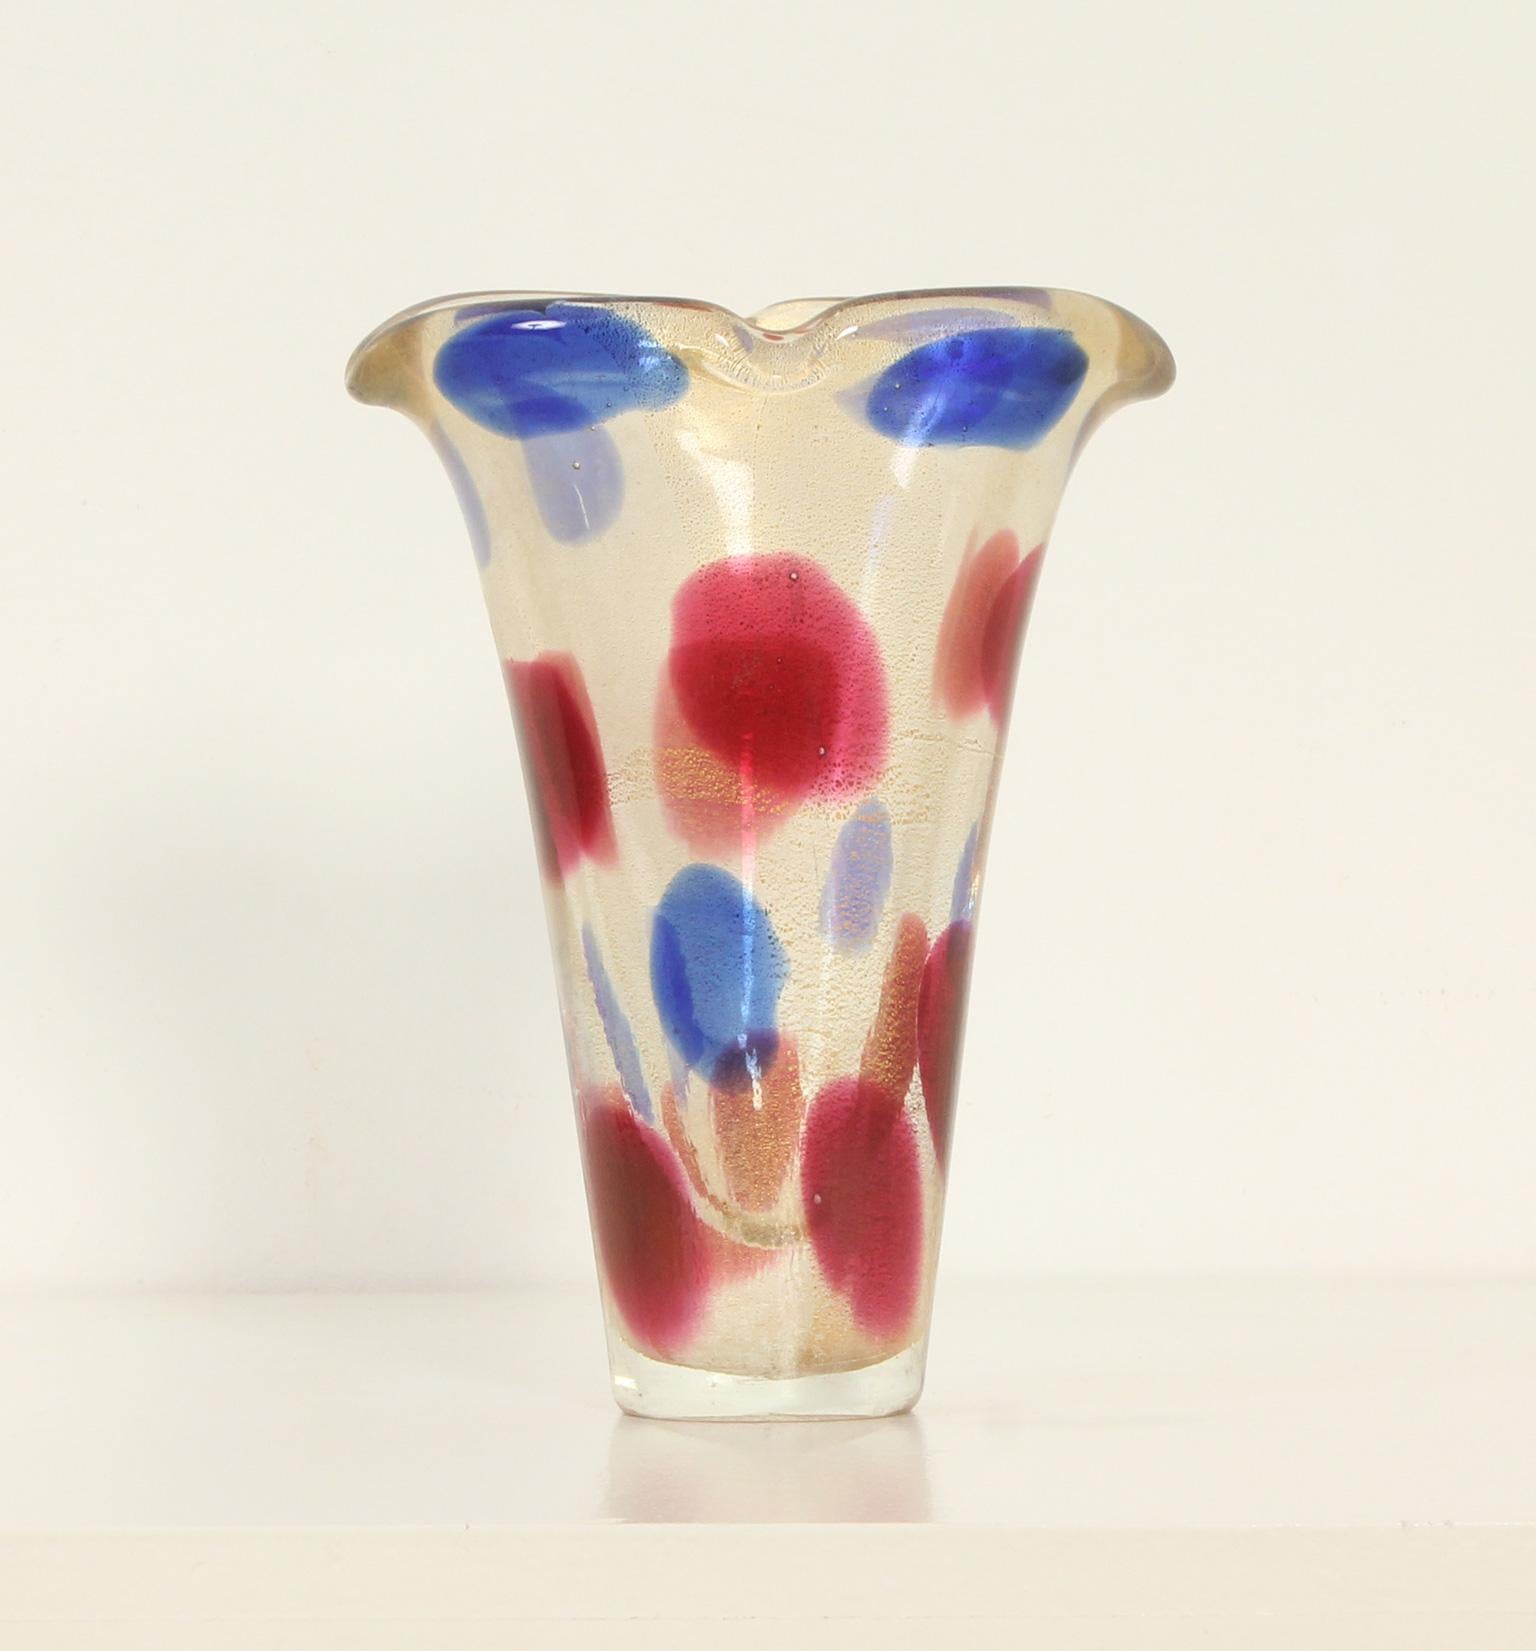 Vase by Fratelli Toso from 1950's, Murano, Italy. Hand blown clear glass with gold inclusions and colored spots. 